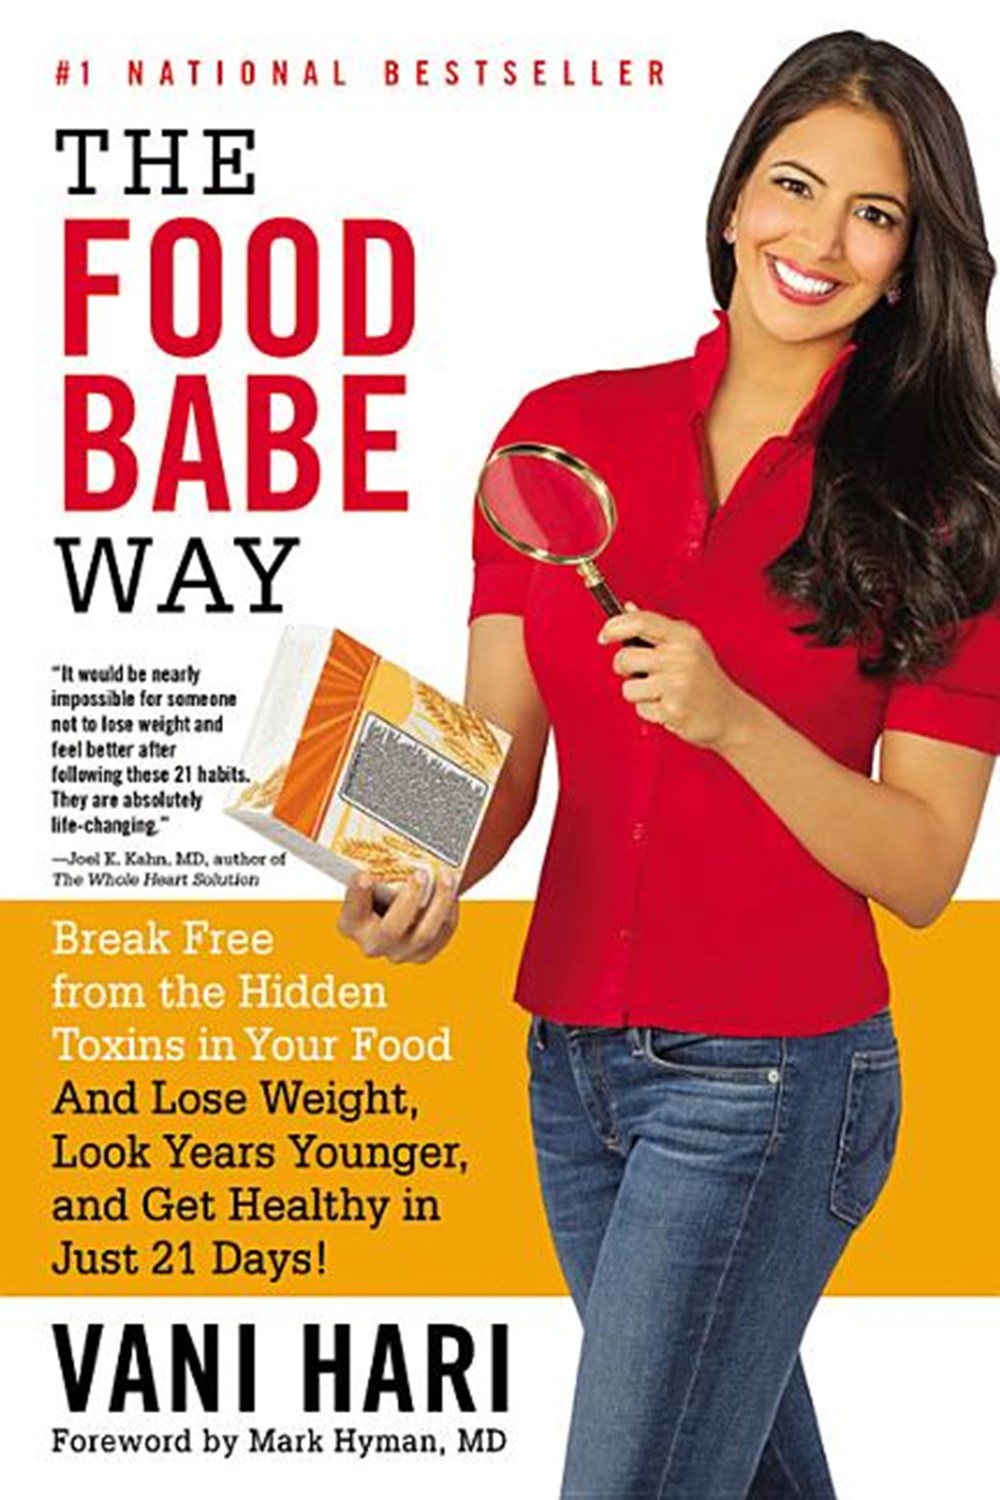 Food Babe Way: Break Free from the Hidden Toxins in Your Food and Lose Weight, Look Years Younger, a